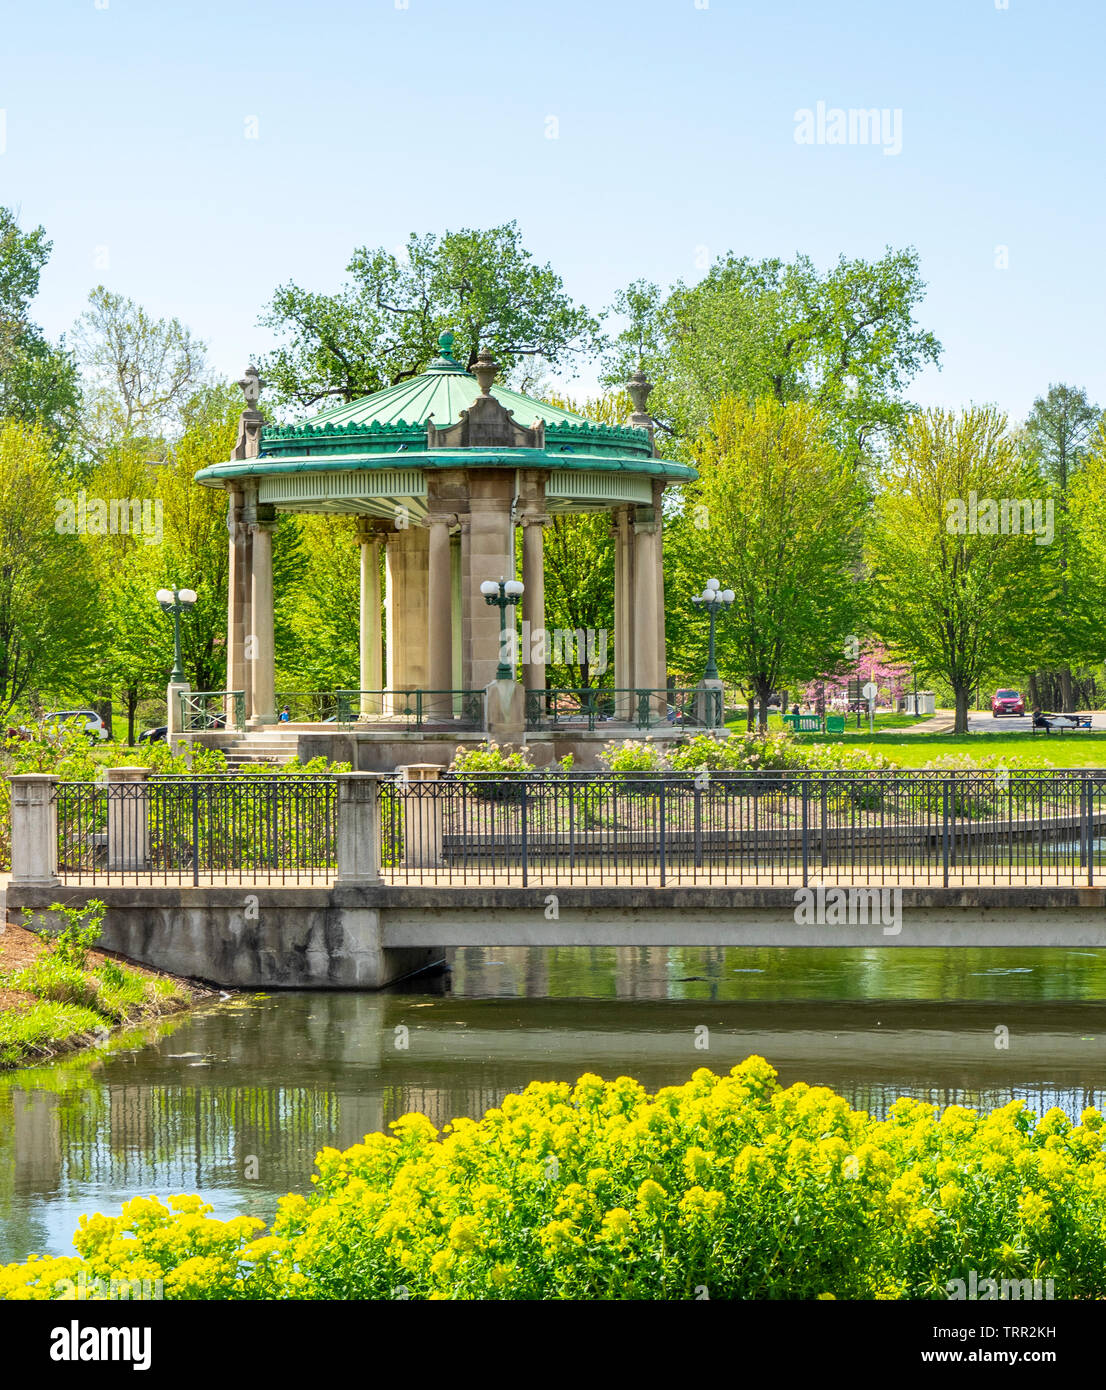 Nathan Frank Bandstand a rotunda on an island in the middle of a lake in Forest Park St Louis Missouri USA. Stock Photo